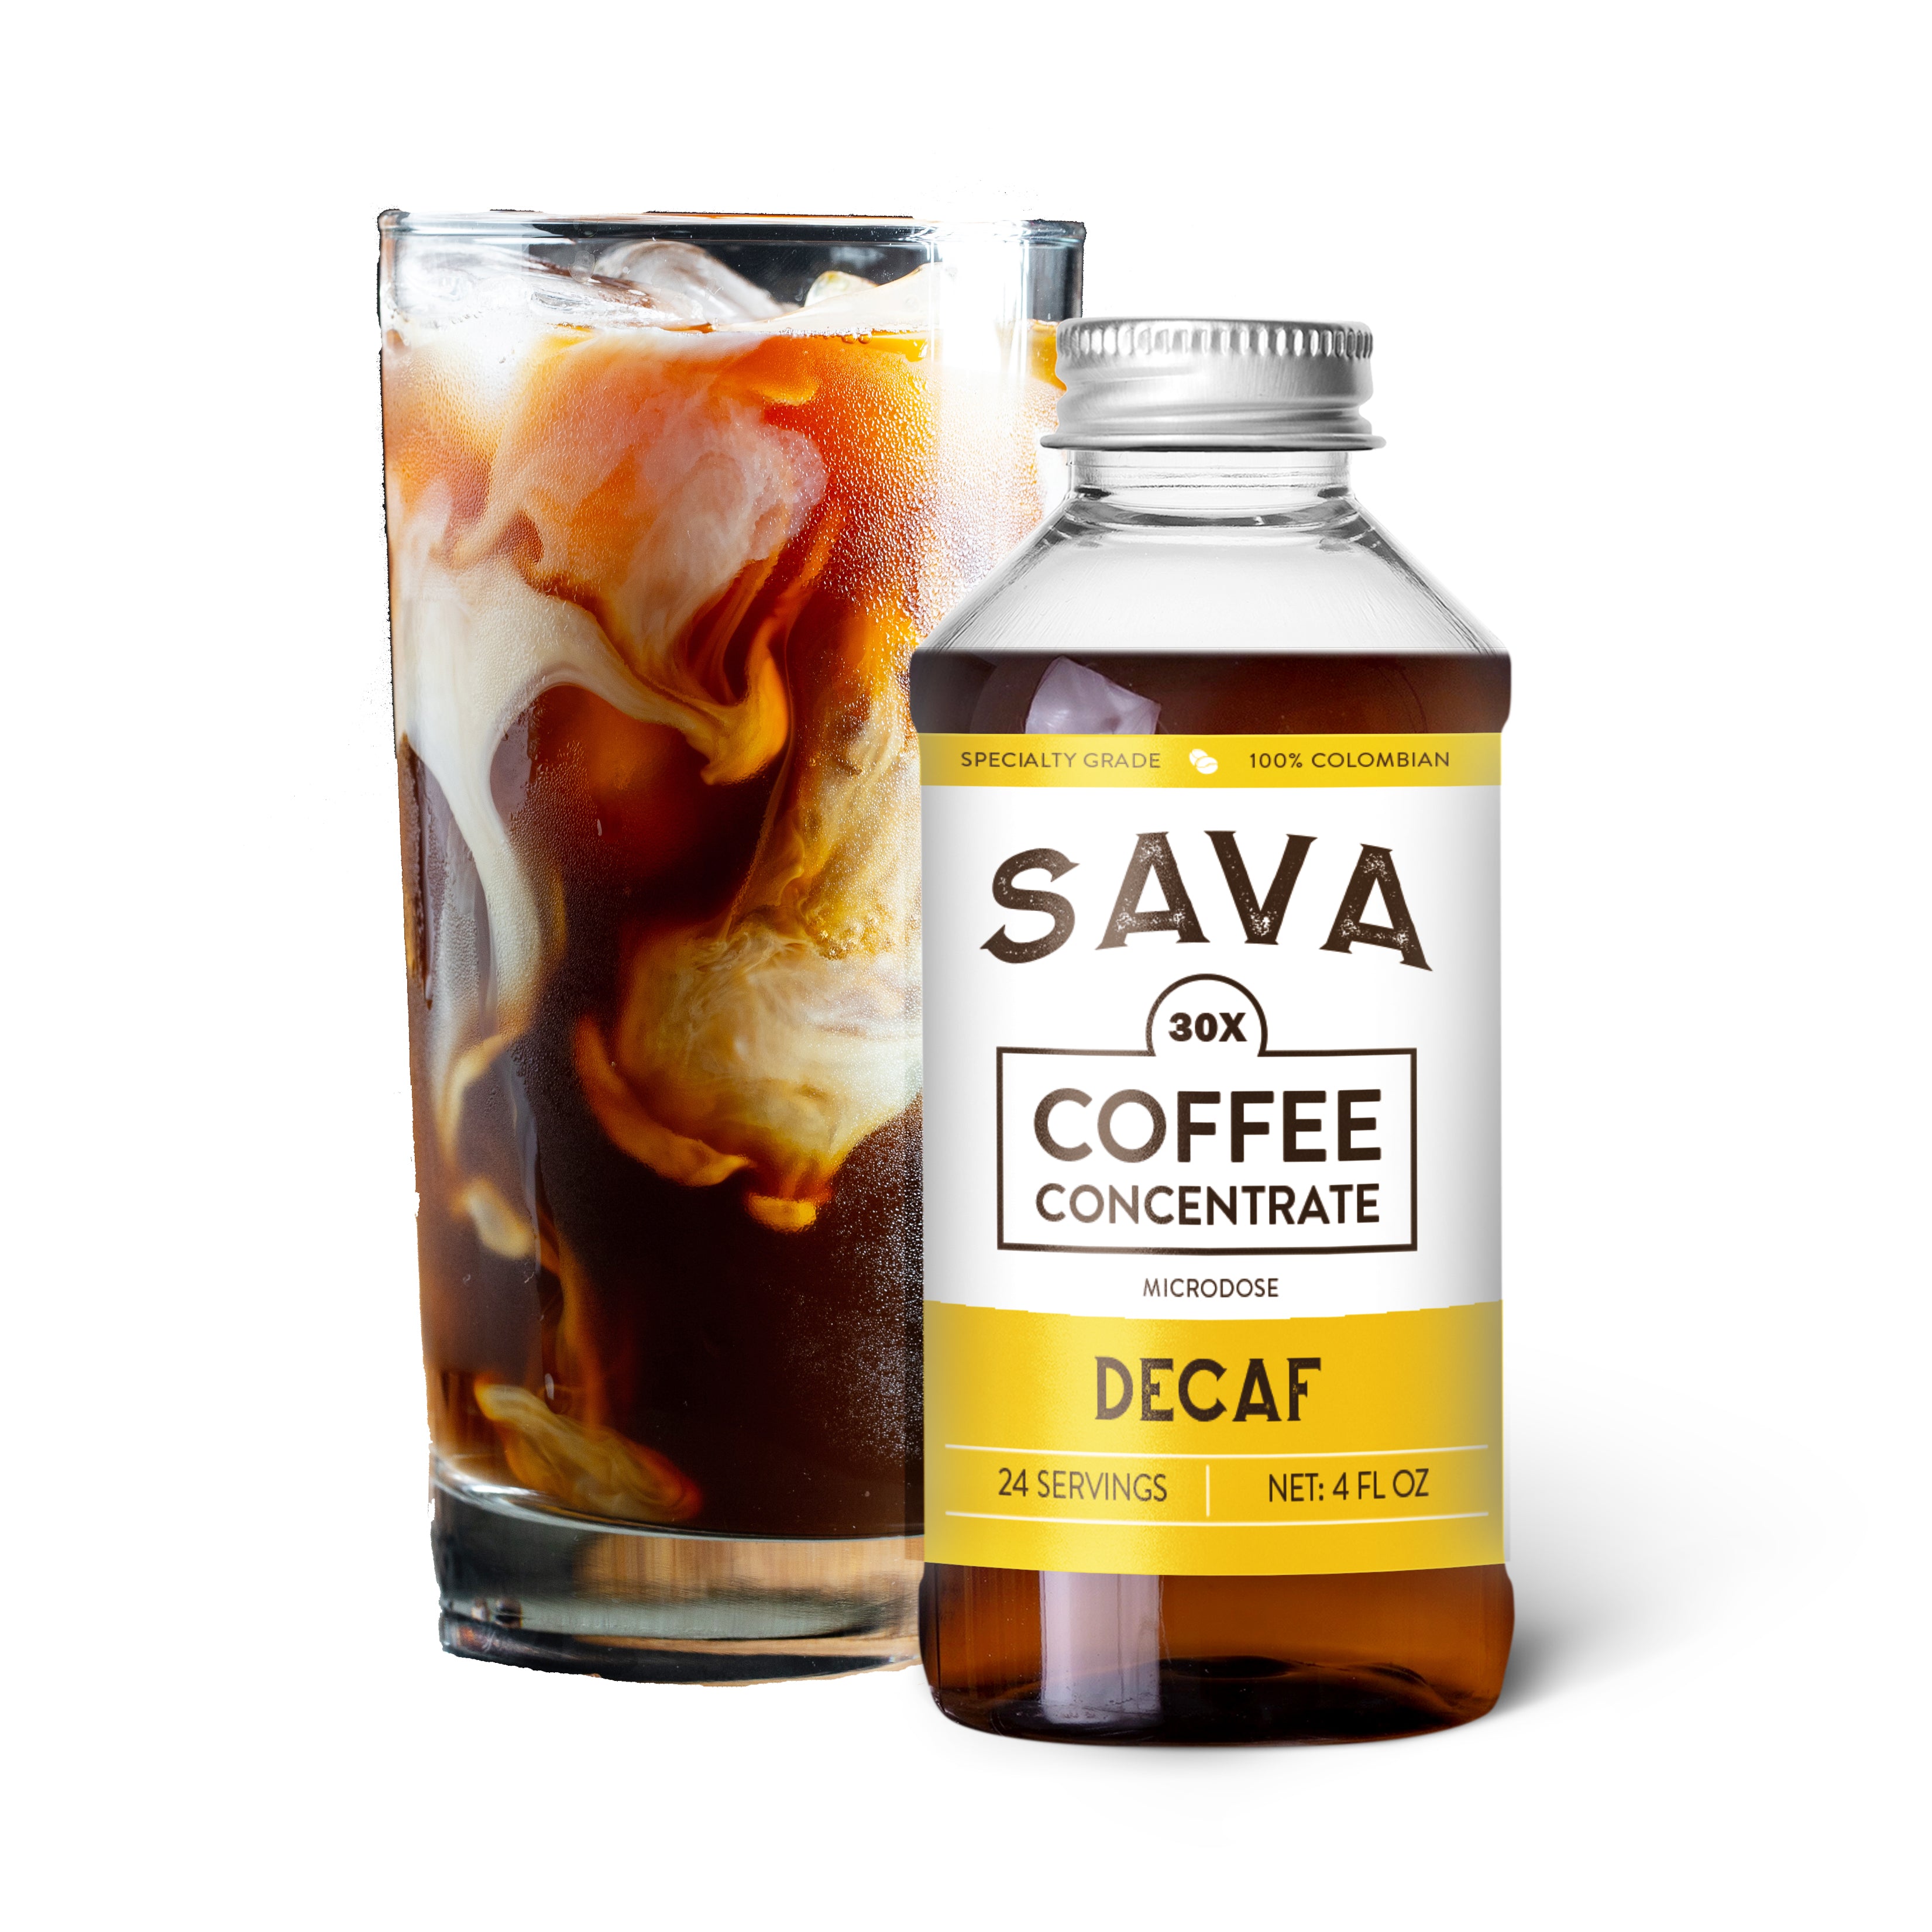 SAVA Cold Brew Coffee Concentrate 30X - Decaf 4 ounce volume